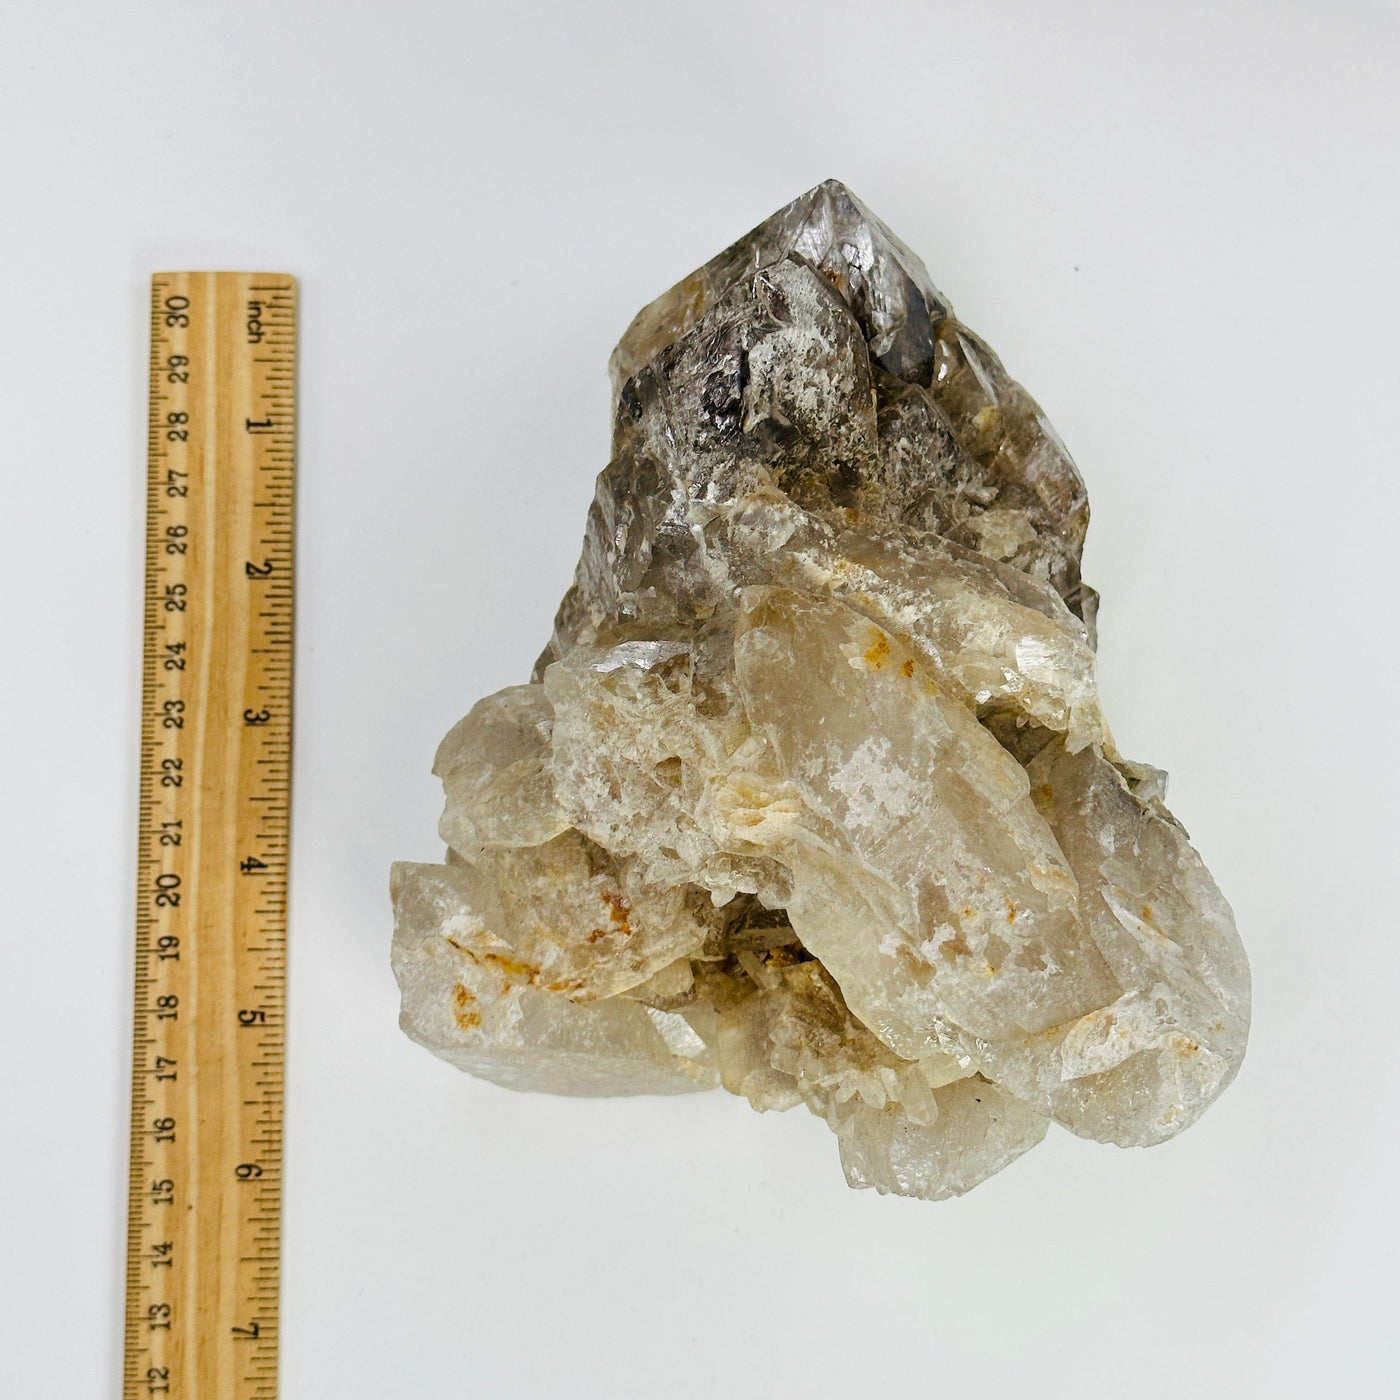 smokey quartz cluster nextto a ruler for size reference